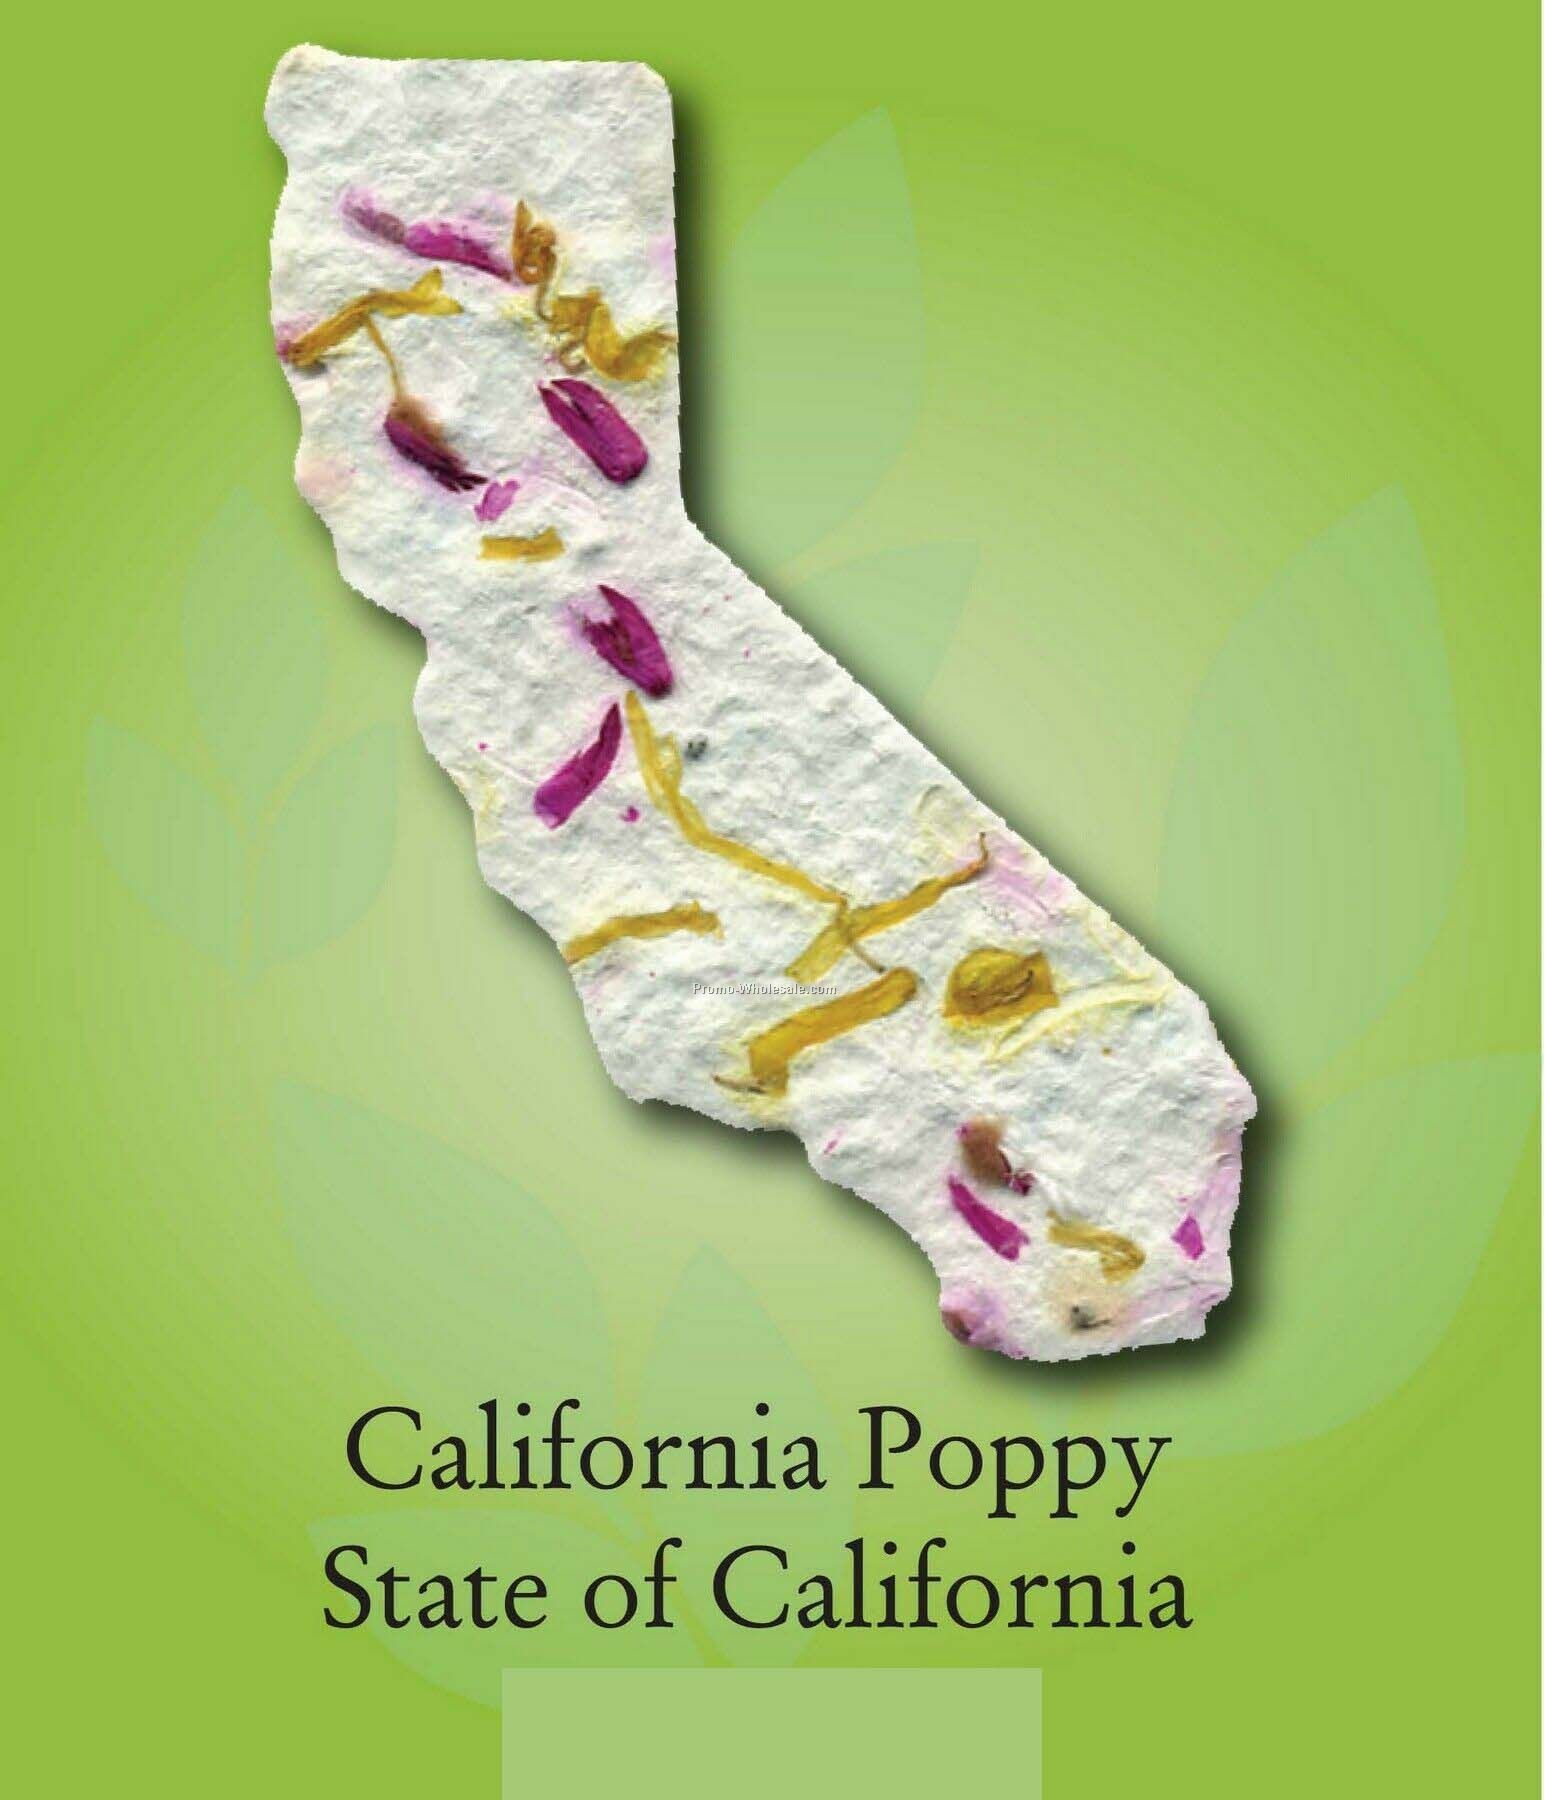 California Poppy State Of California Ornament W/ Embedded Seed